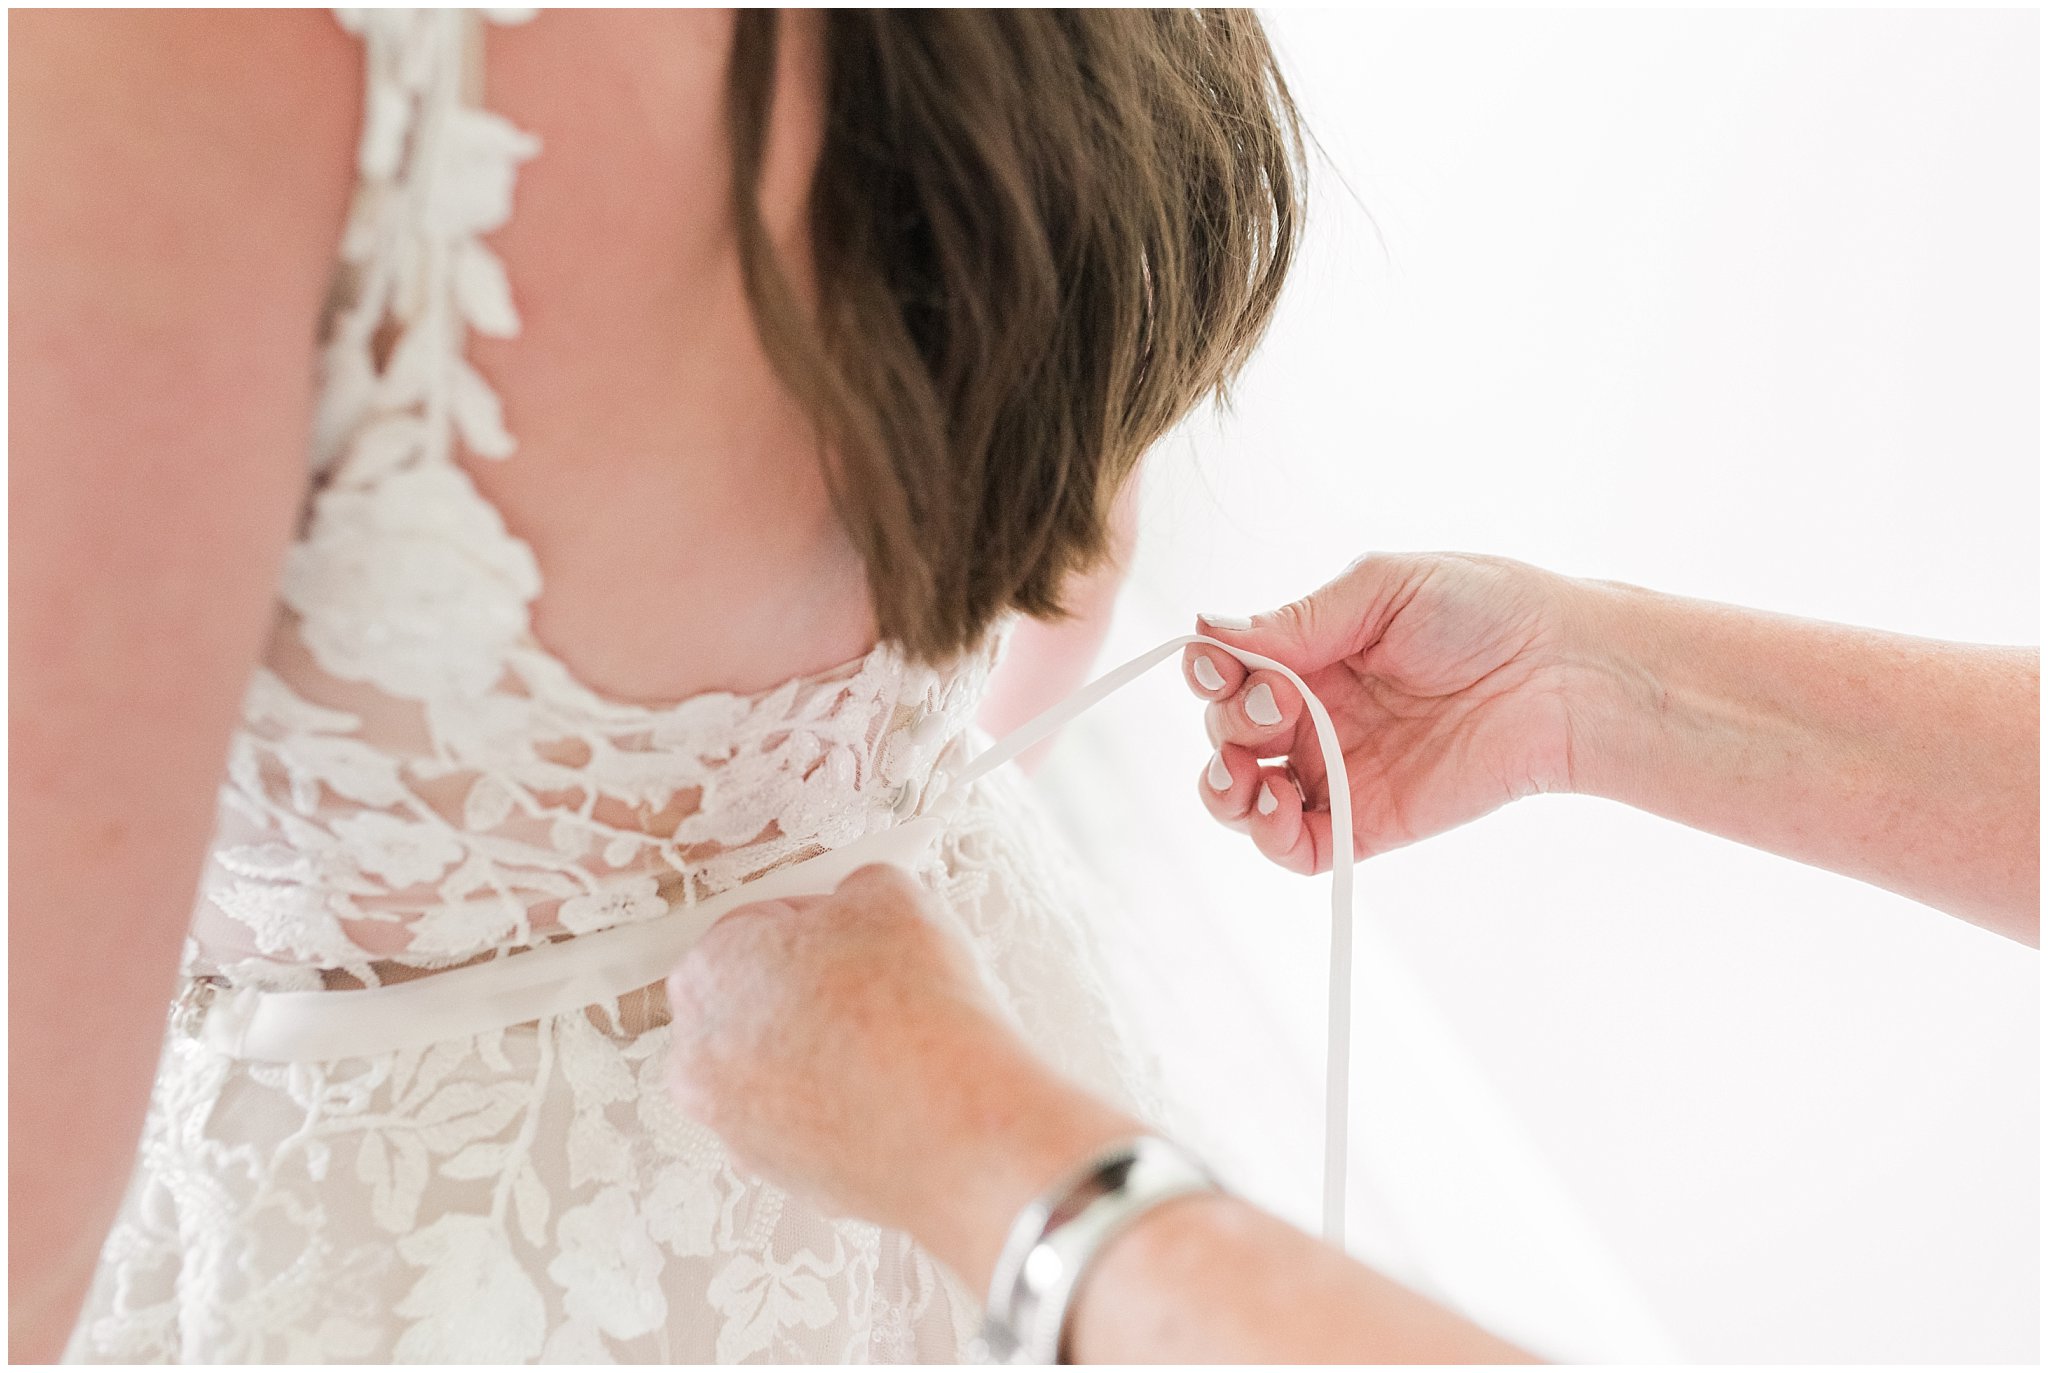 Mom tying back of bride's dress | Oak Hills Utah Dusty Rose and Gray Summer Wedding | Jessie and Dallin Photography